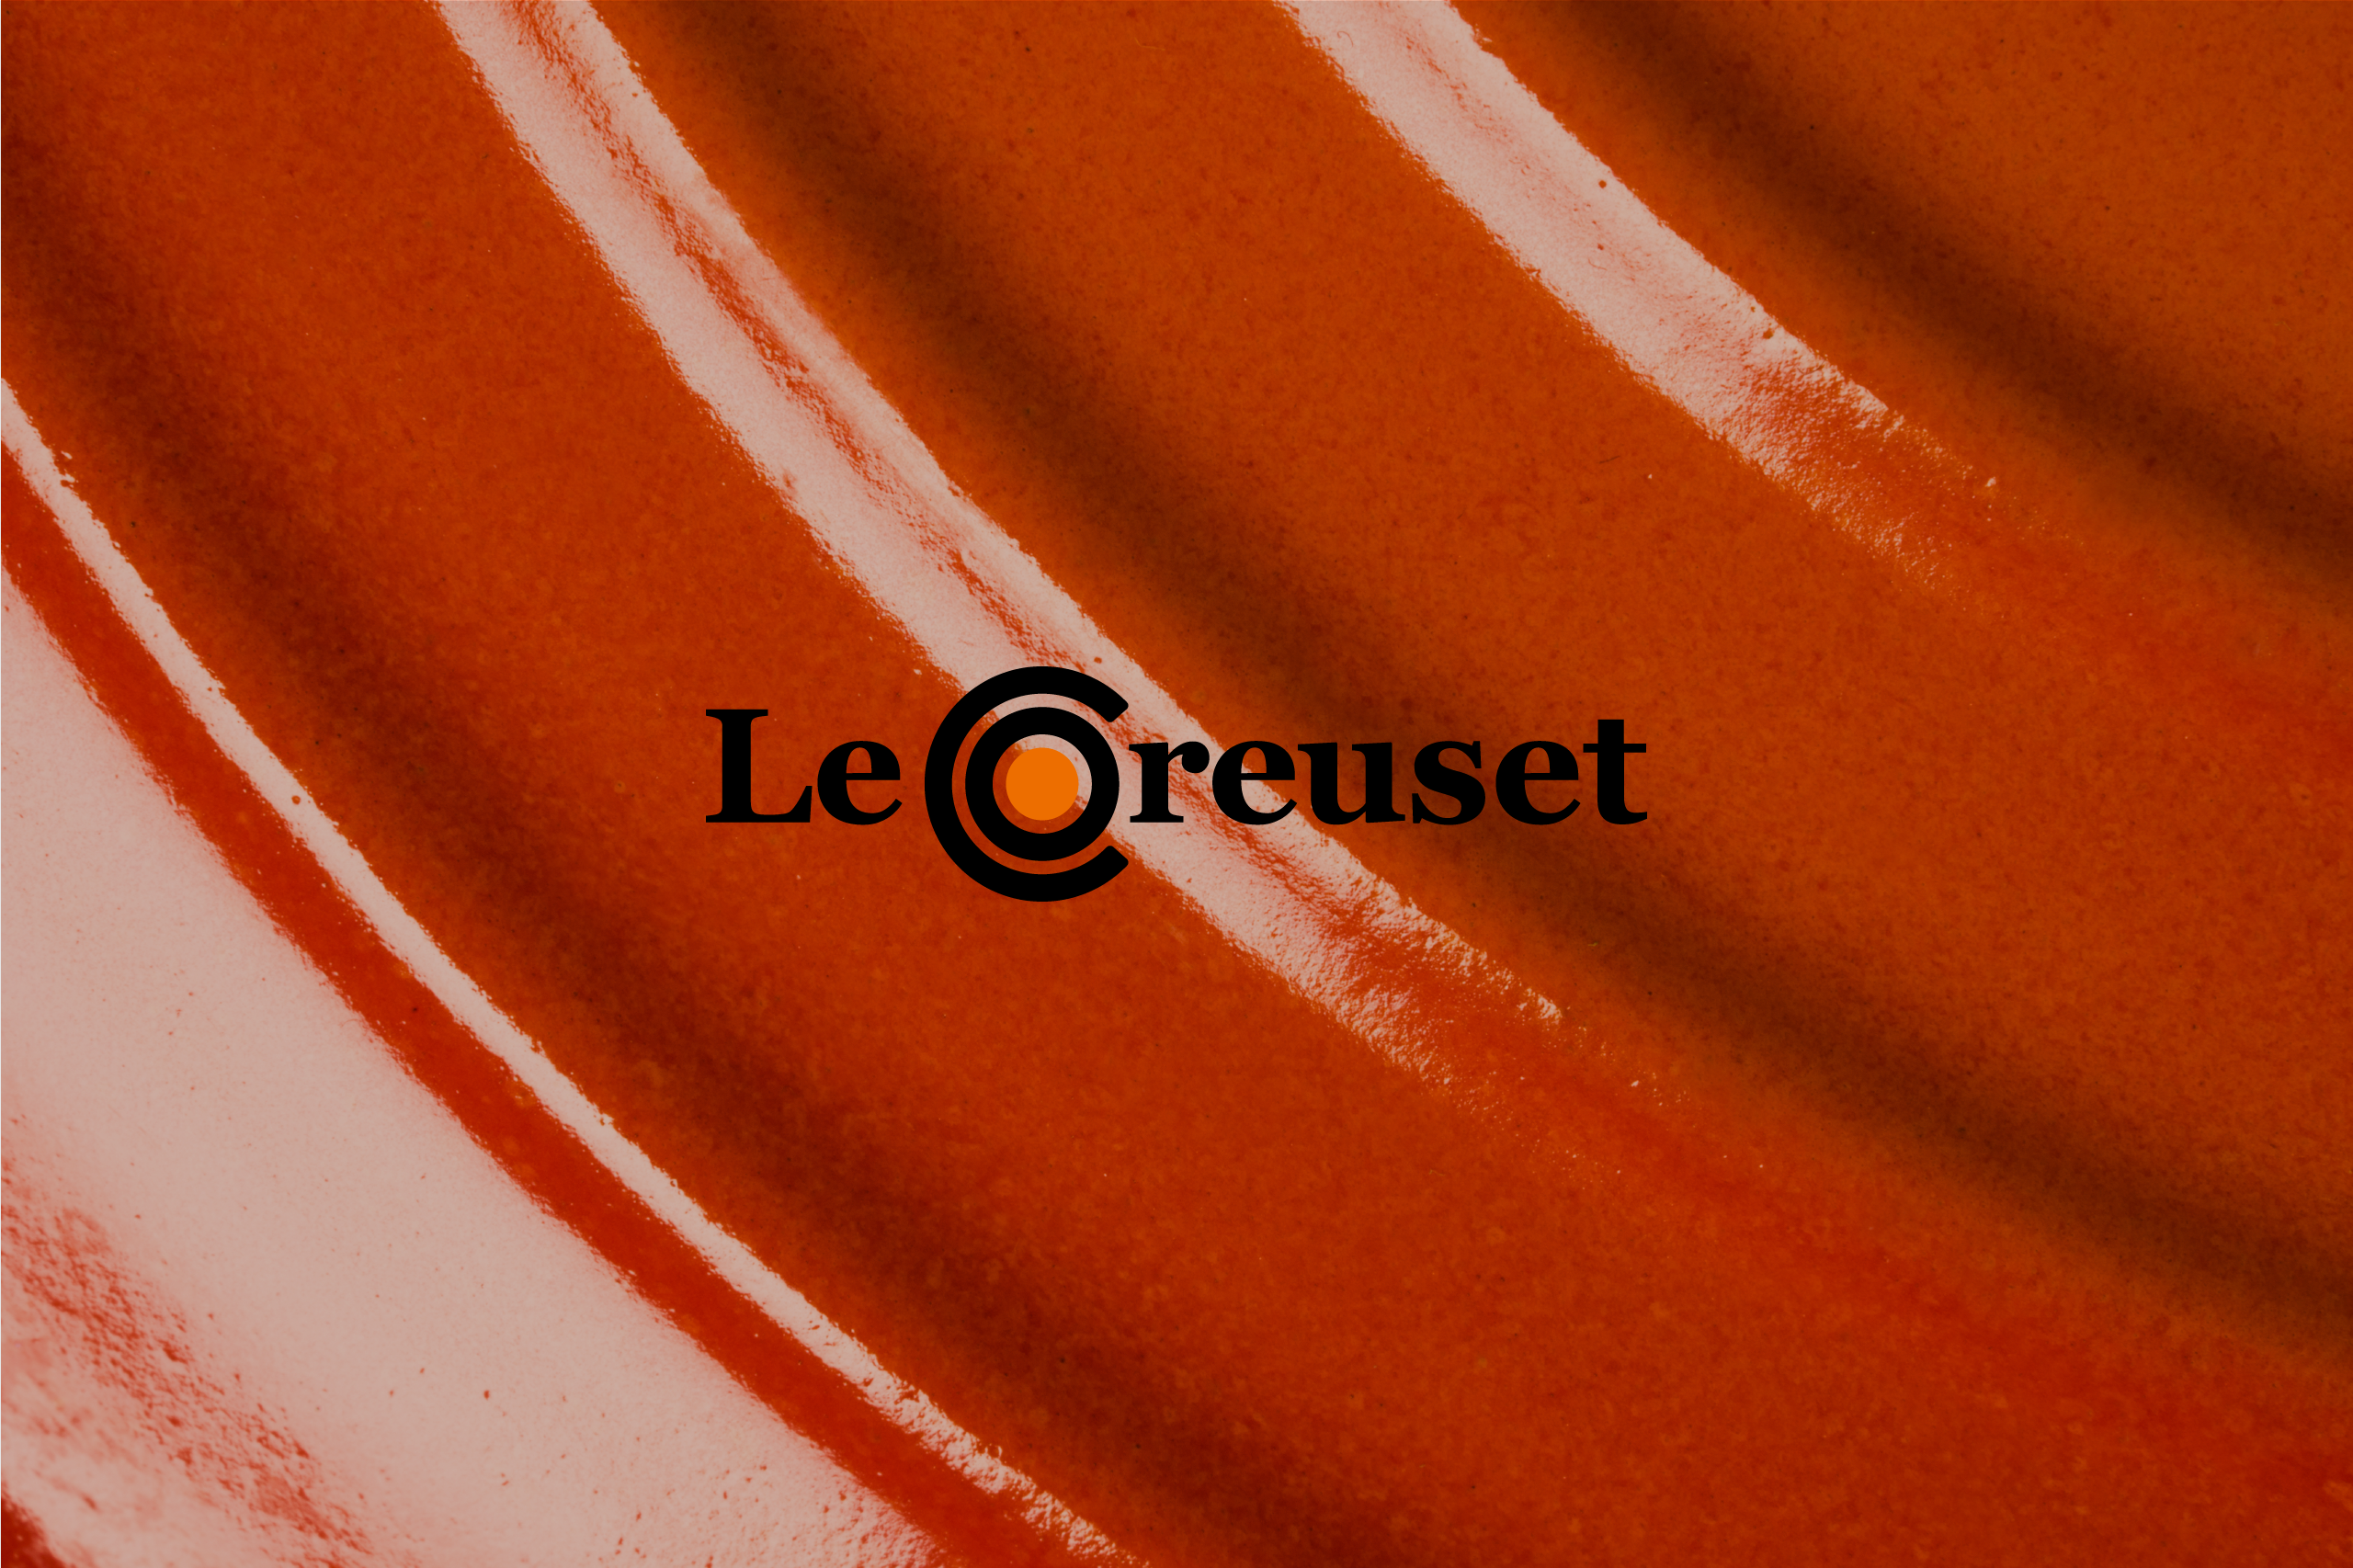 Le Creuset logo redesign proposal by Xavier Wendling